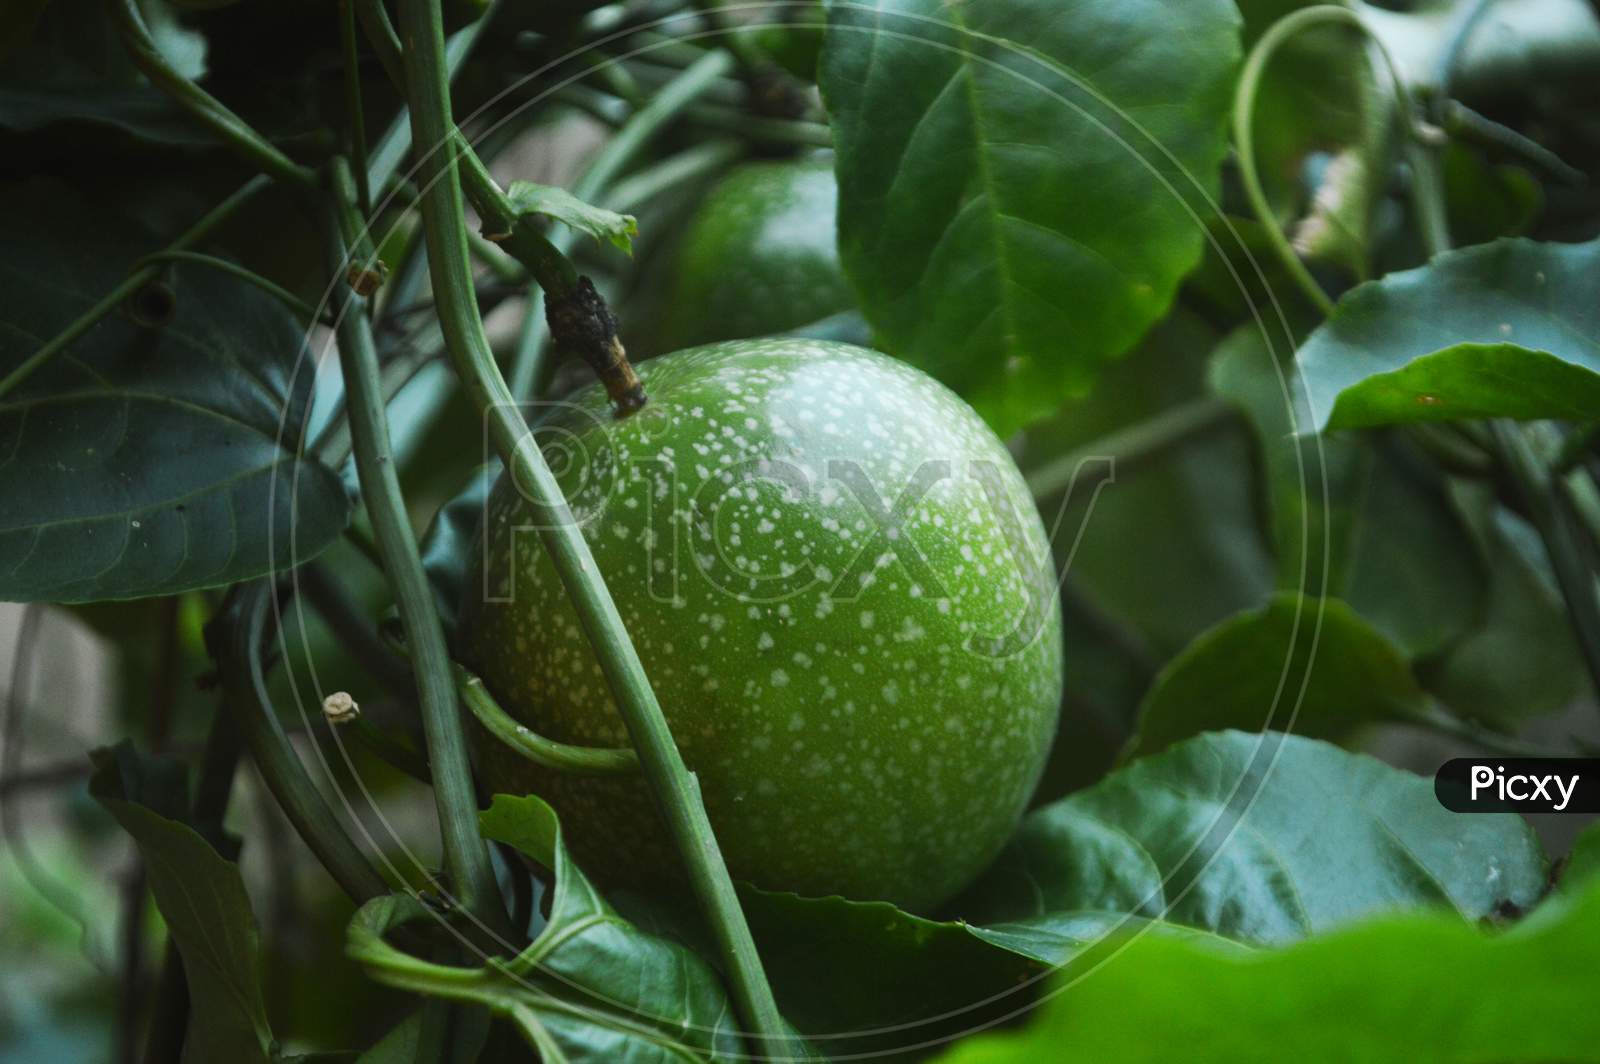 Close Up Of Green Passion Fruit In Blurred Background